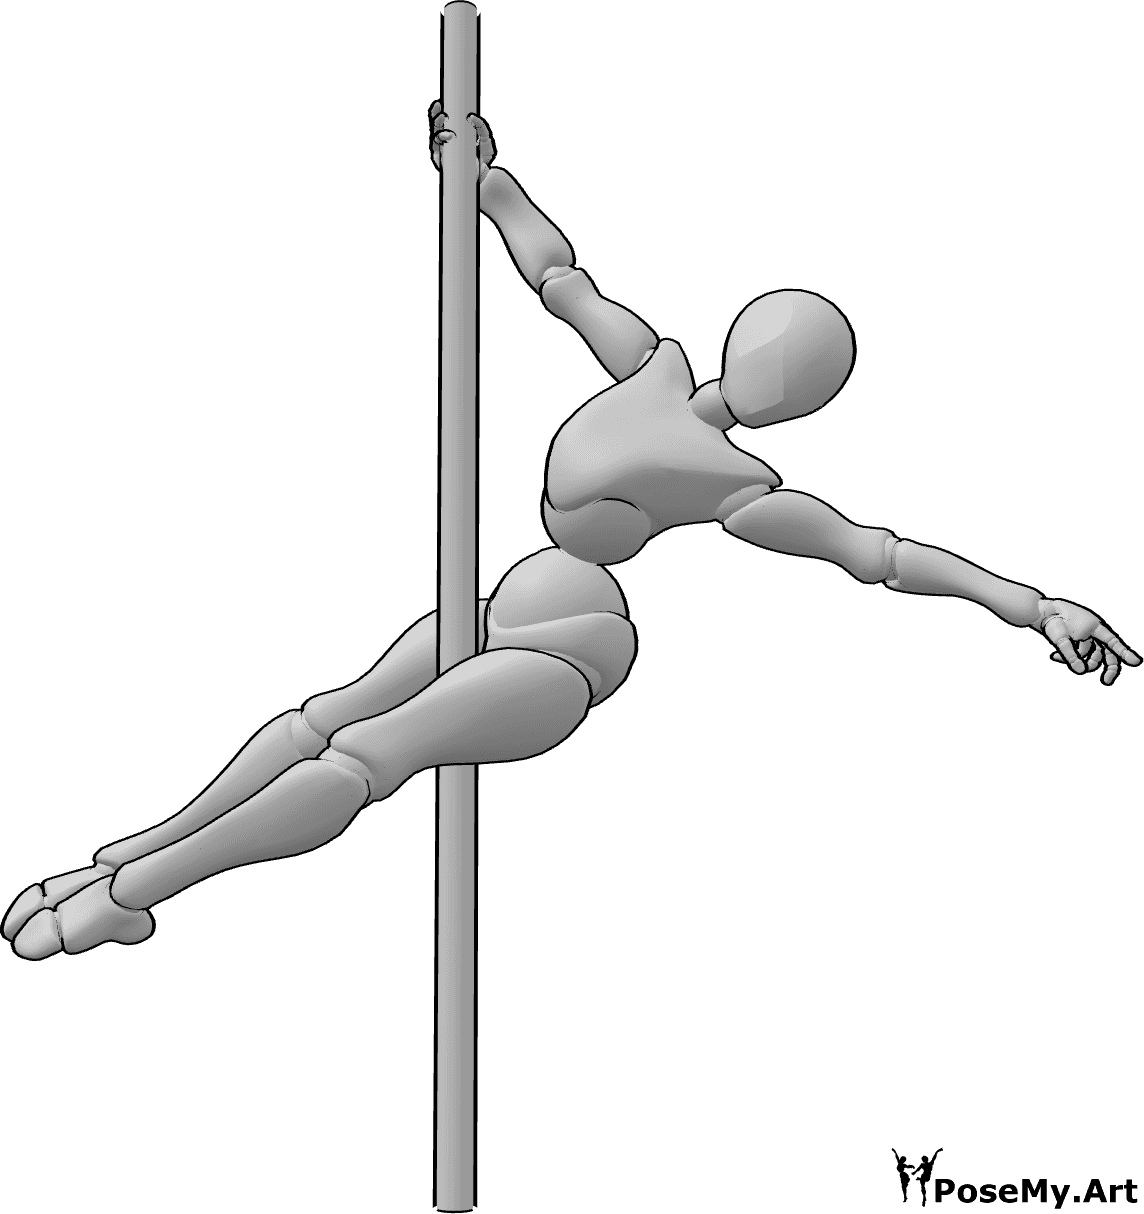 Pose Reference - Pole dance spin pose - Female pole dancer is holding the pole with her right hand and spinning around